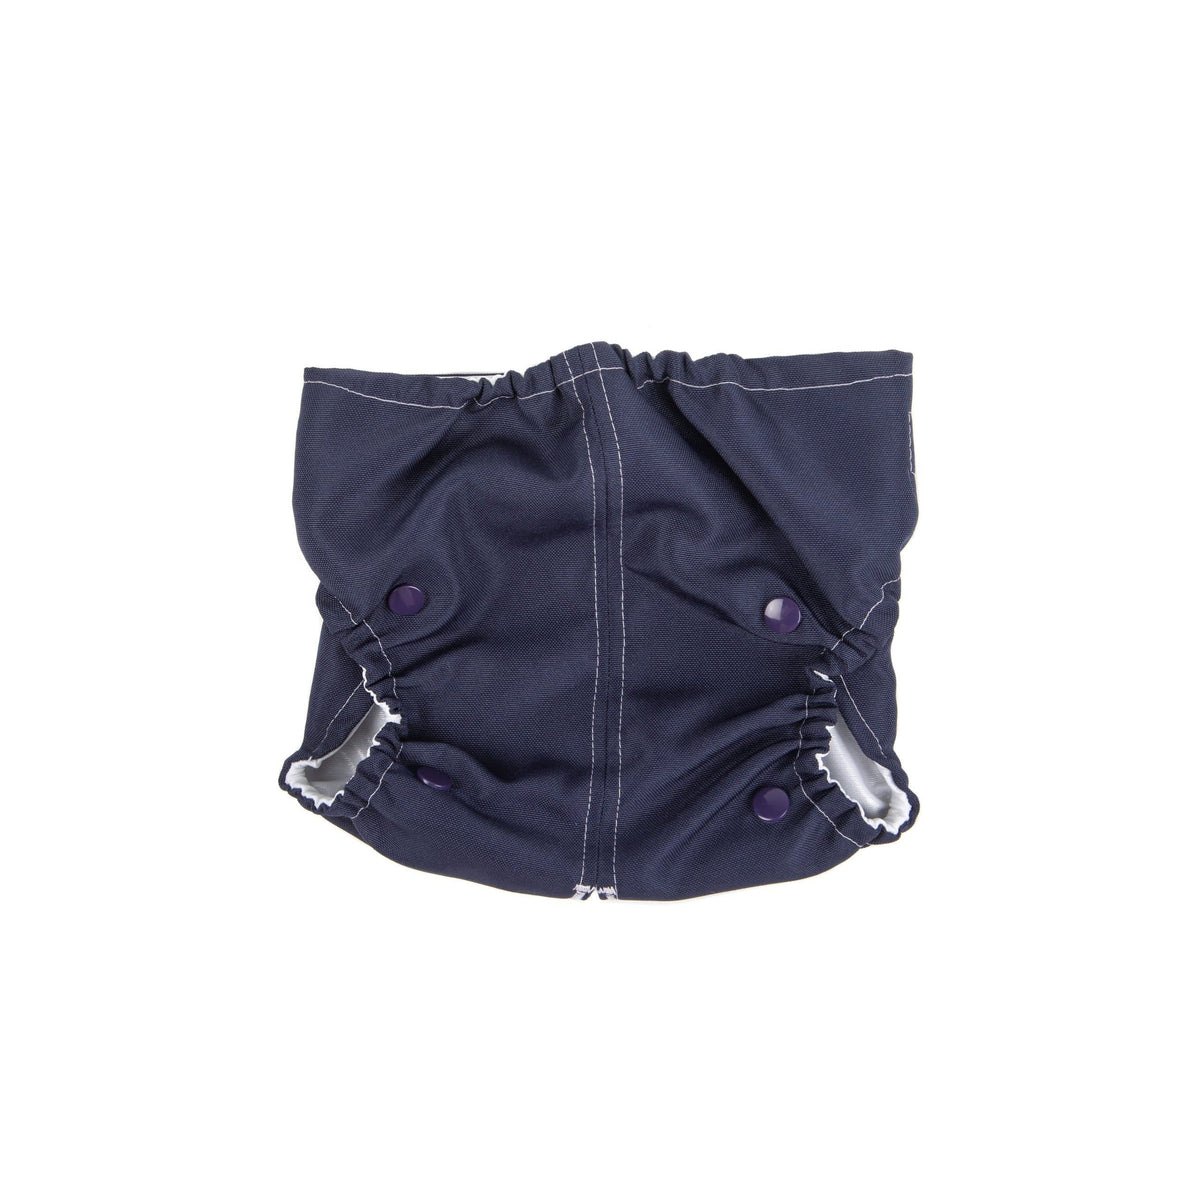 Dundies Navy All In One Nappy (AIO)-Dundies Australia - Vet Recommended Pet Nappies